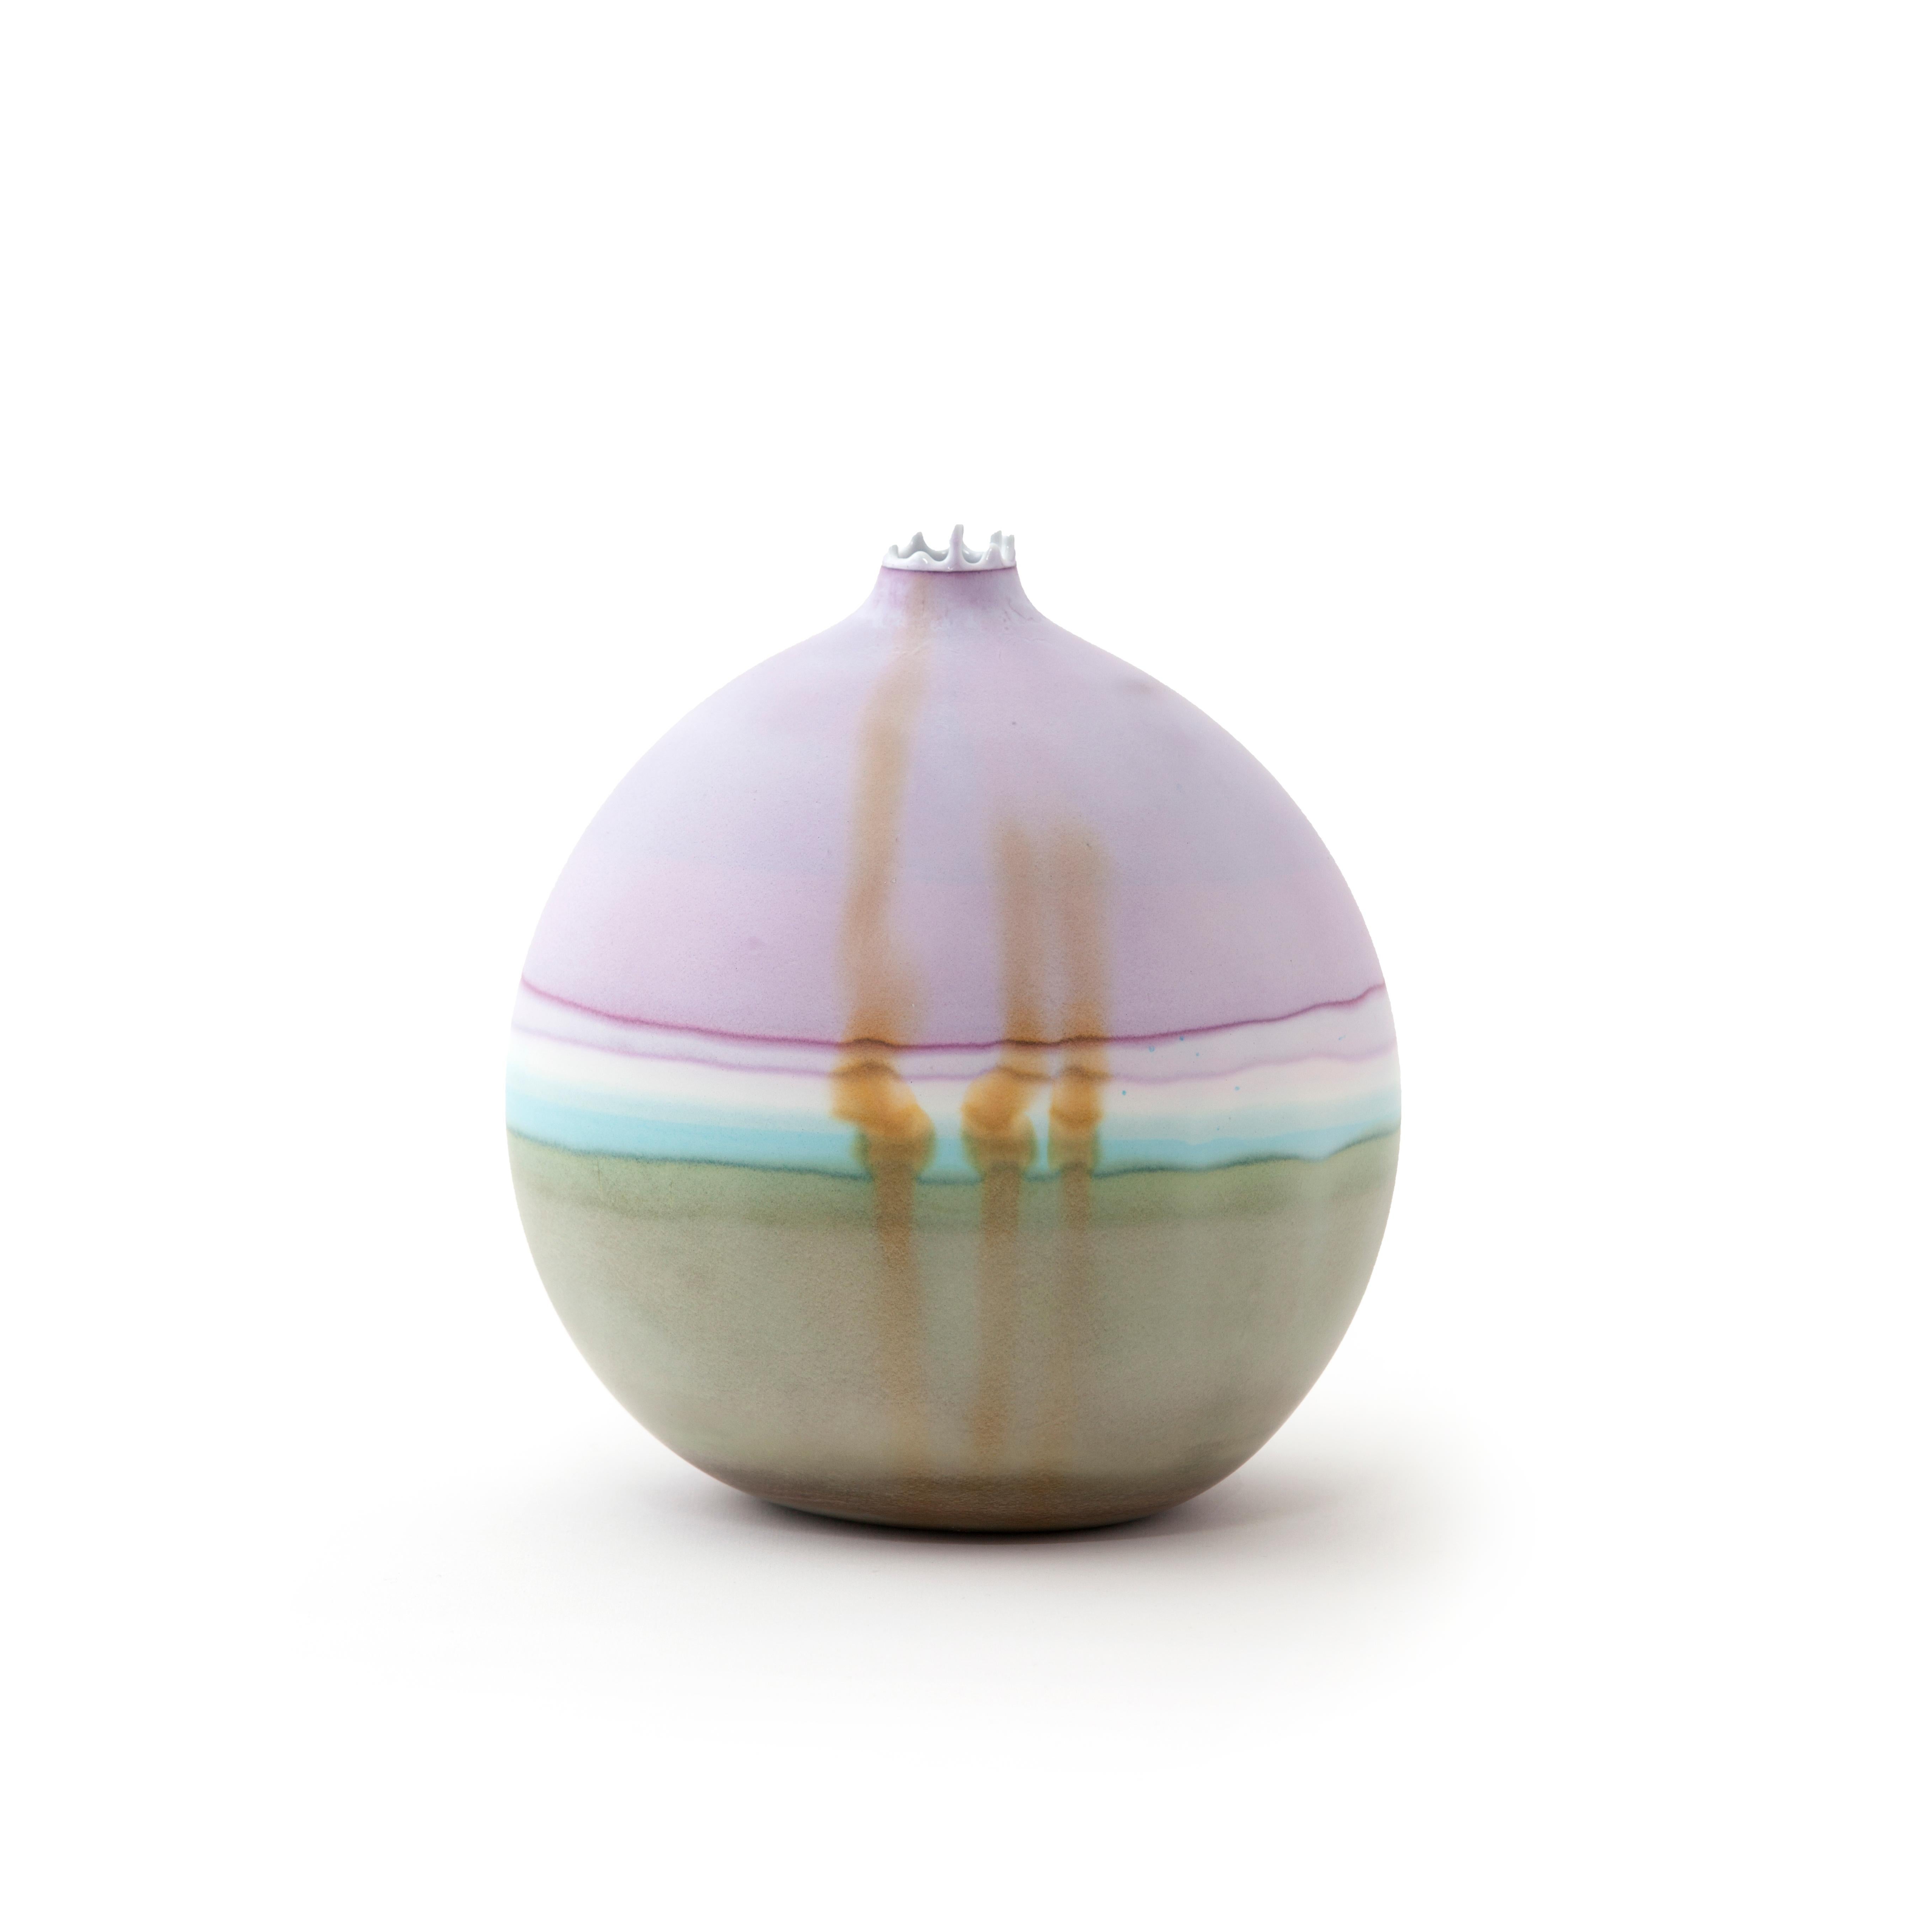 Lilac Patina saturn vase by Elyse Graham
Dimensions: W 20 x D 20 x H 23 cm
Materials: Plaster, Resin
Molded, dyed, and finished by Hand in LA. Customization
Available.
All pieces are made to order

This collection of vessels is inspired by